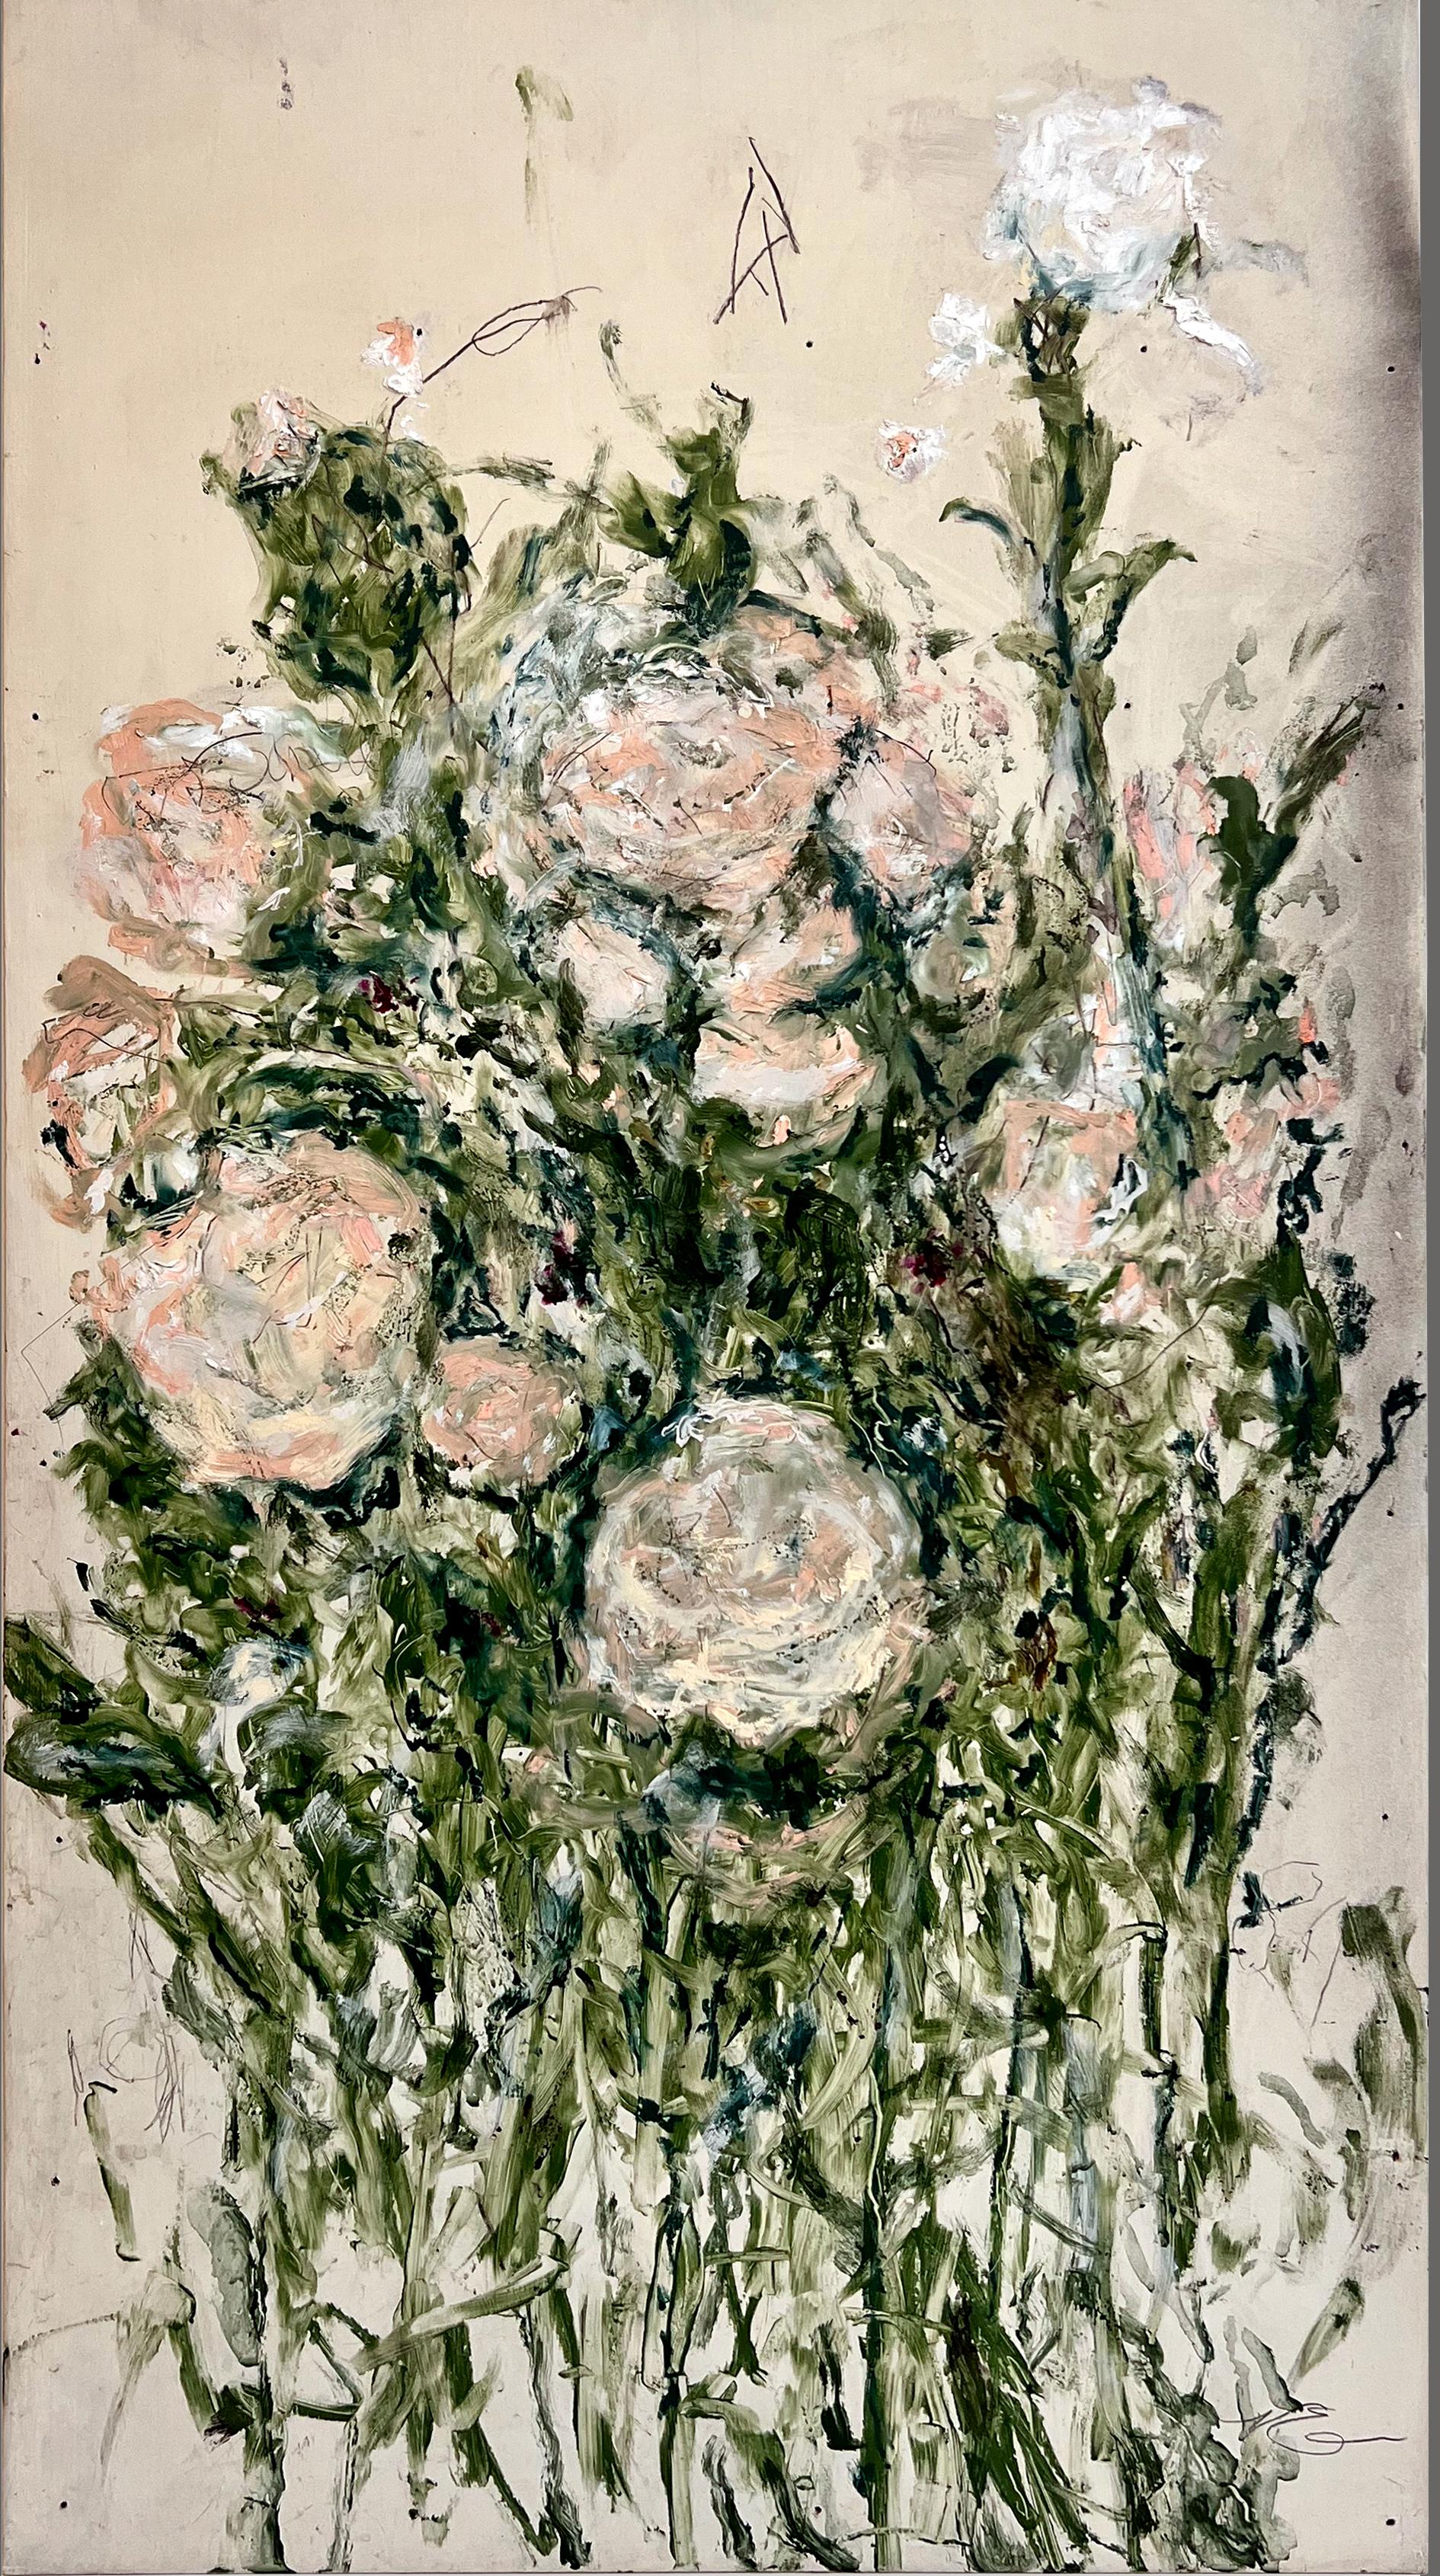 Nicholas Evans Abstract Painting - "May’s Response" (Abstract, Pastel, Pink, Green, Floral Painting on Wood Panel)